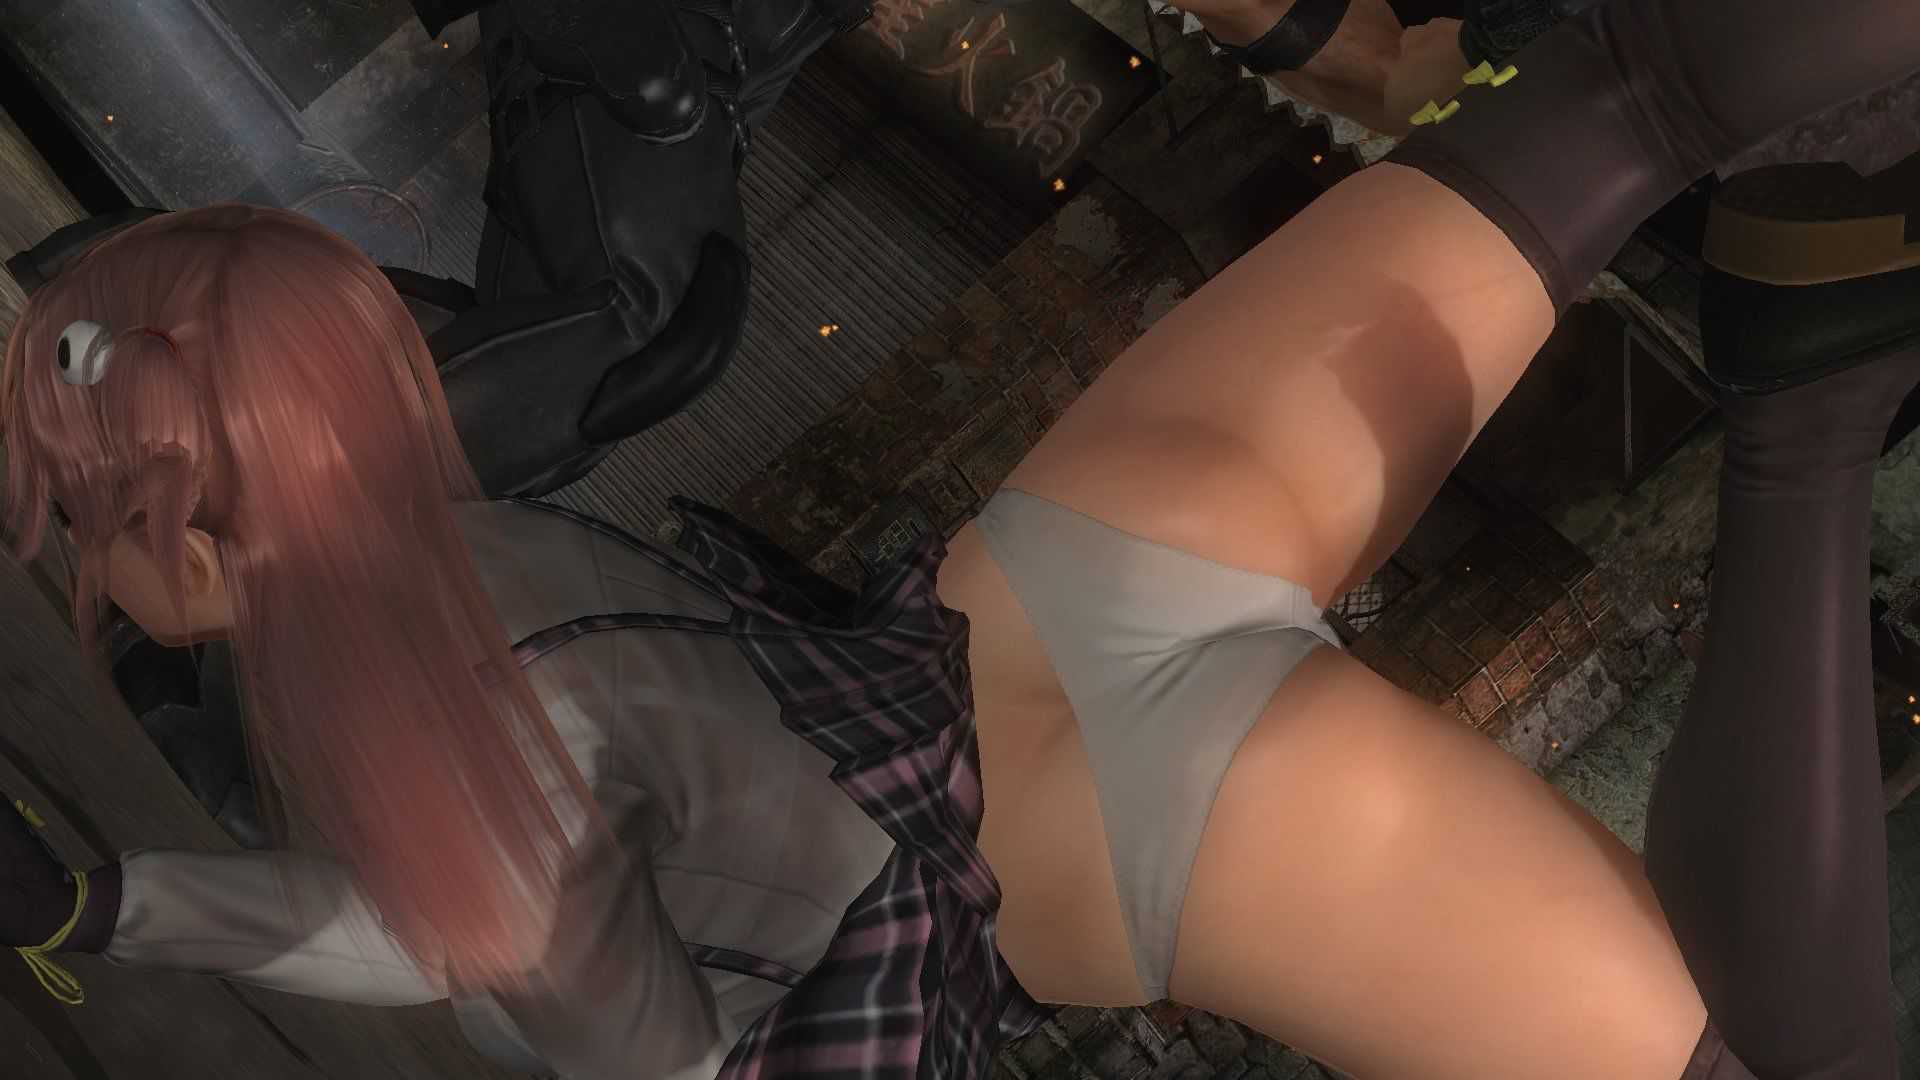 [Dead or alive] women's high life insurance or CHAN's and was breasts ass whip lash too erotic. [game CG include: 8